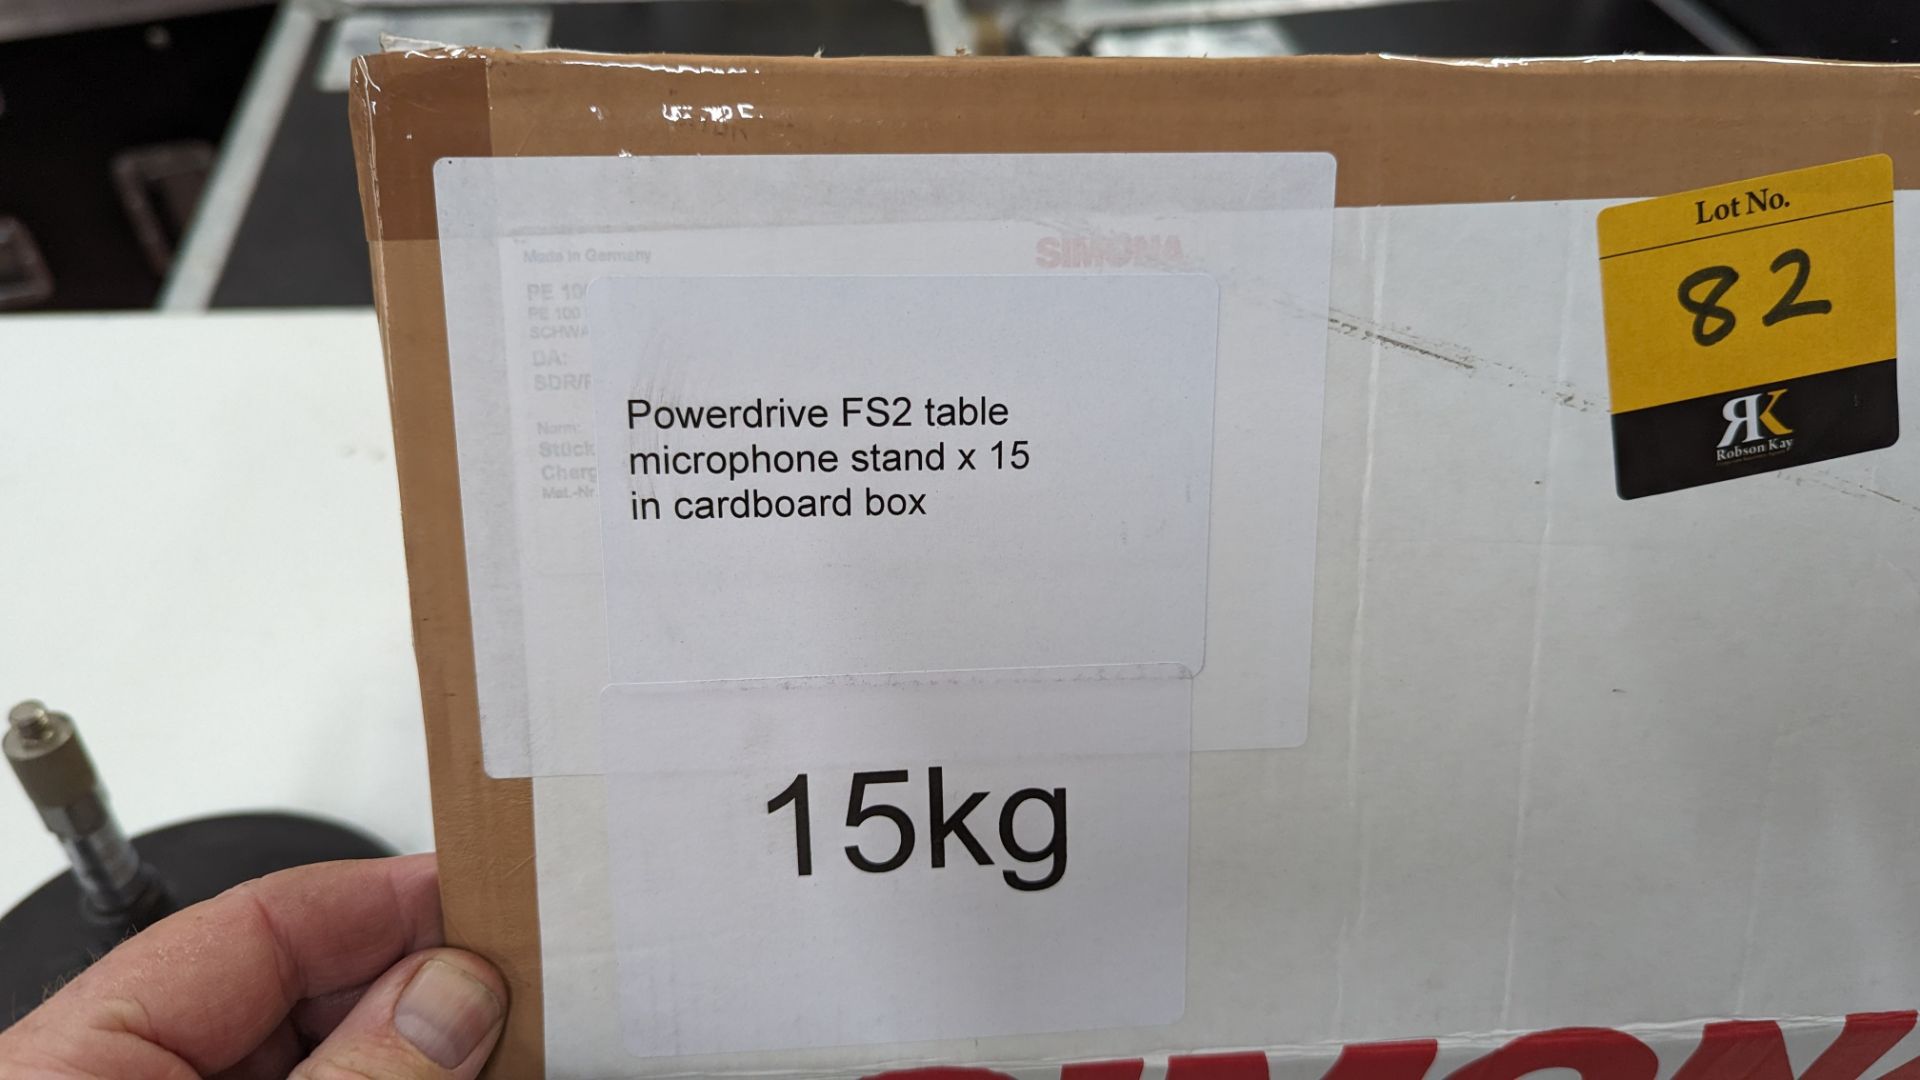 15 off Powerdrive model FS2 table microphone stands. Includes cardboard box. Total lot weight: 15kg - Image 5 of 6